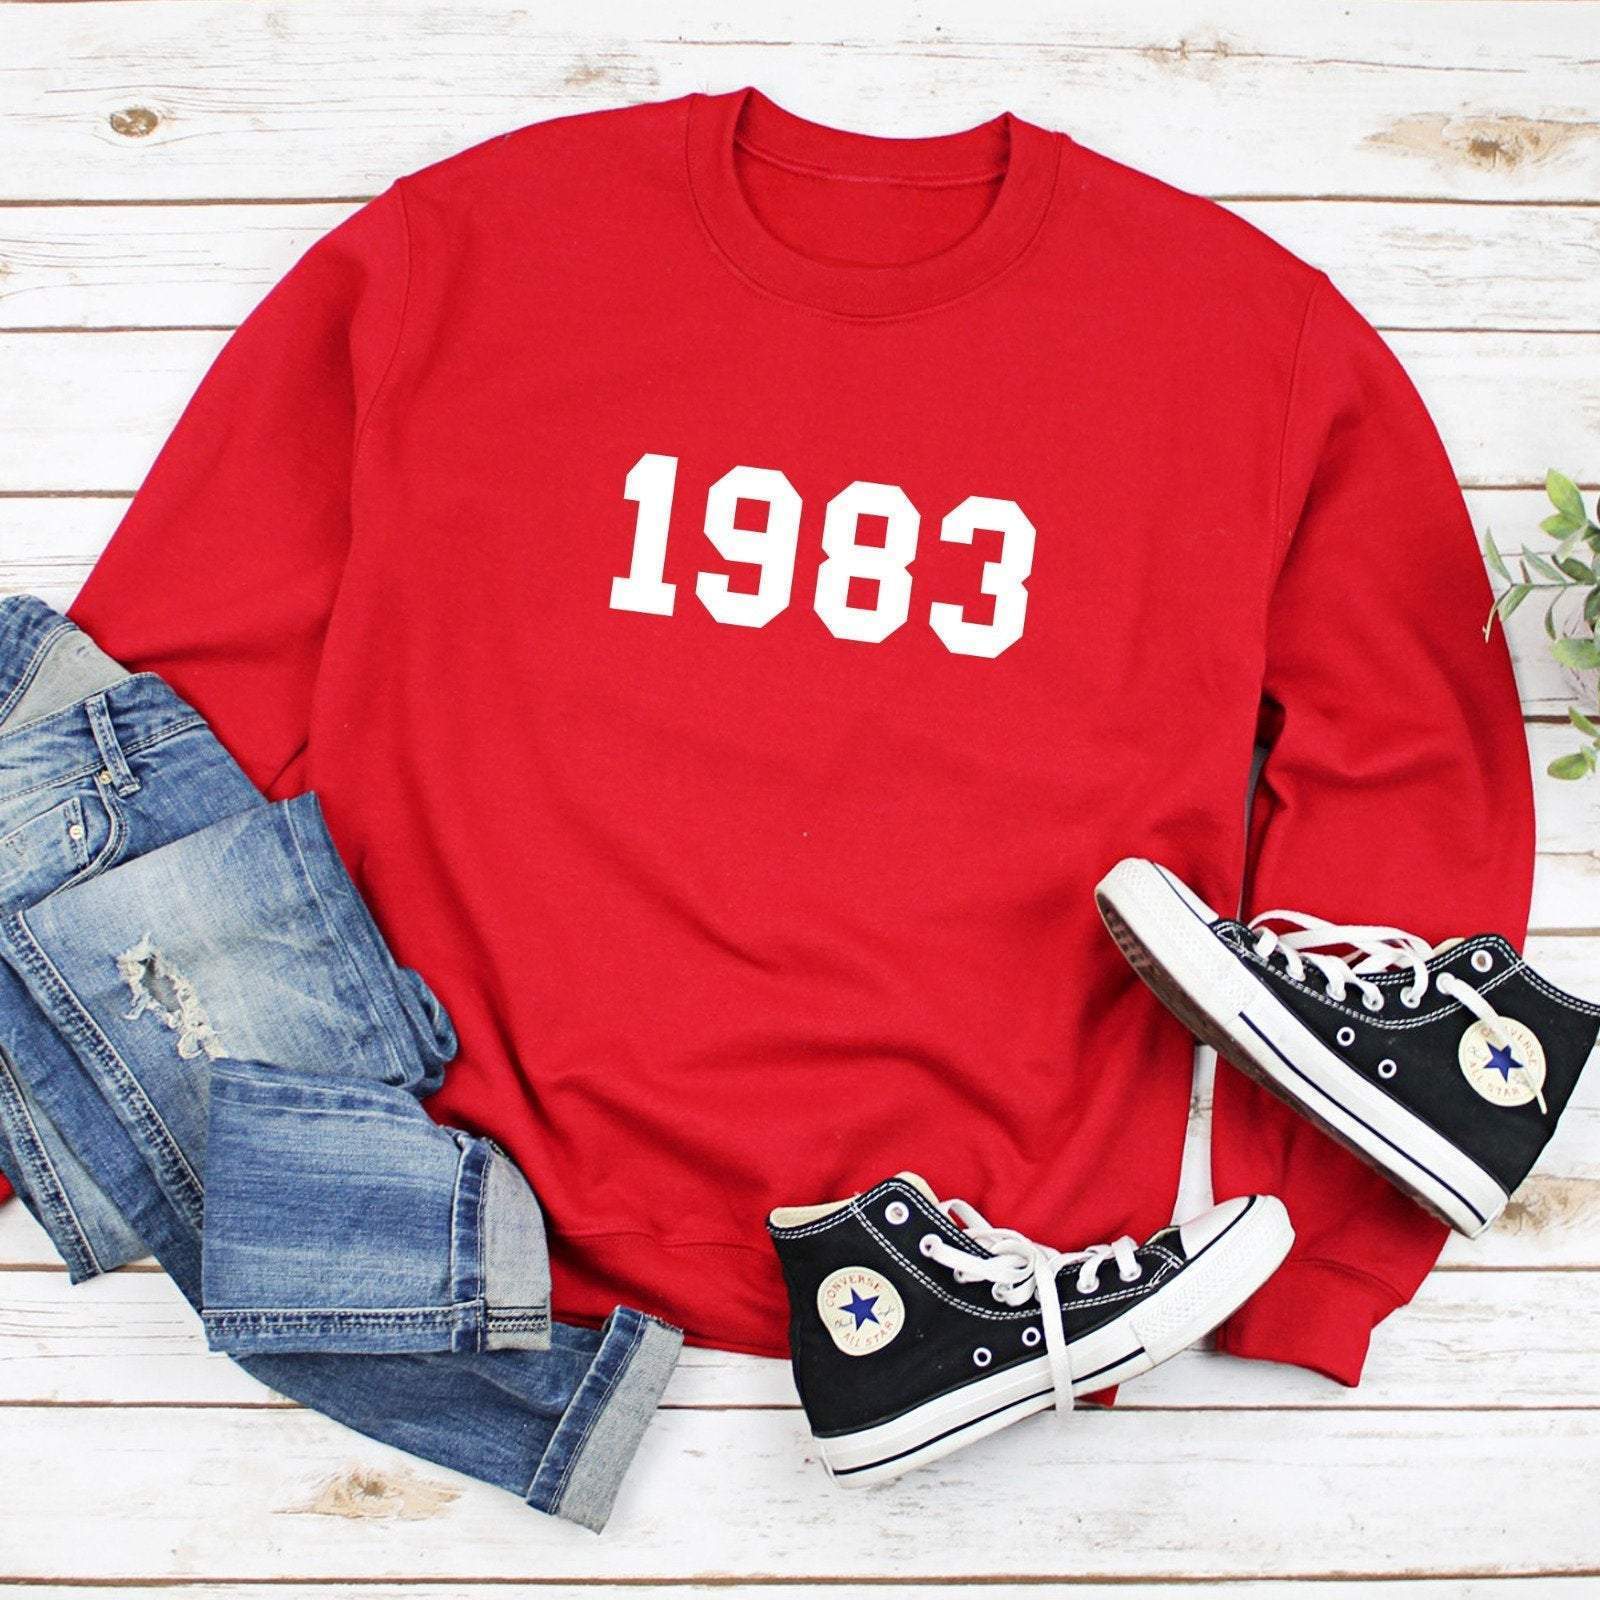 Year of Birth jumper, Personalised Year top, Birthday jumper, Any Year Printed